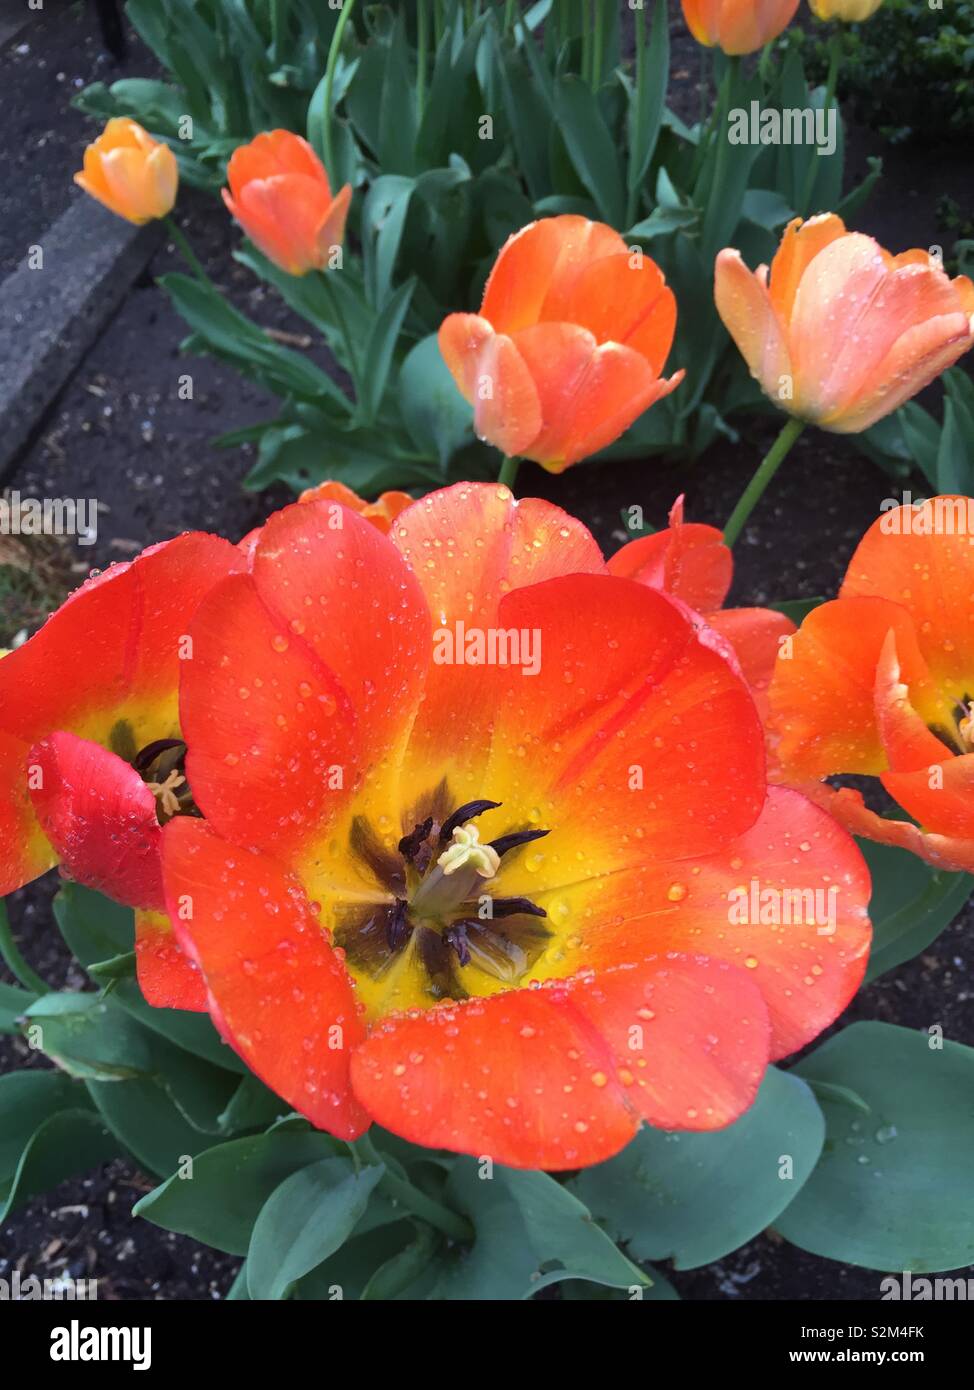 Dew drops on Radiant orange tulips, open with yellow centers and blue green leaves Stock Photo